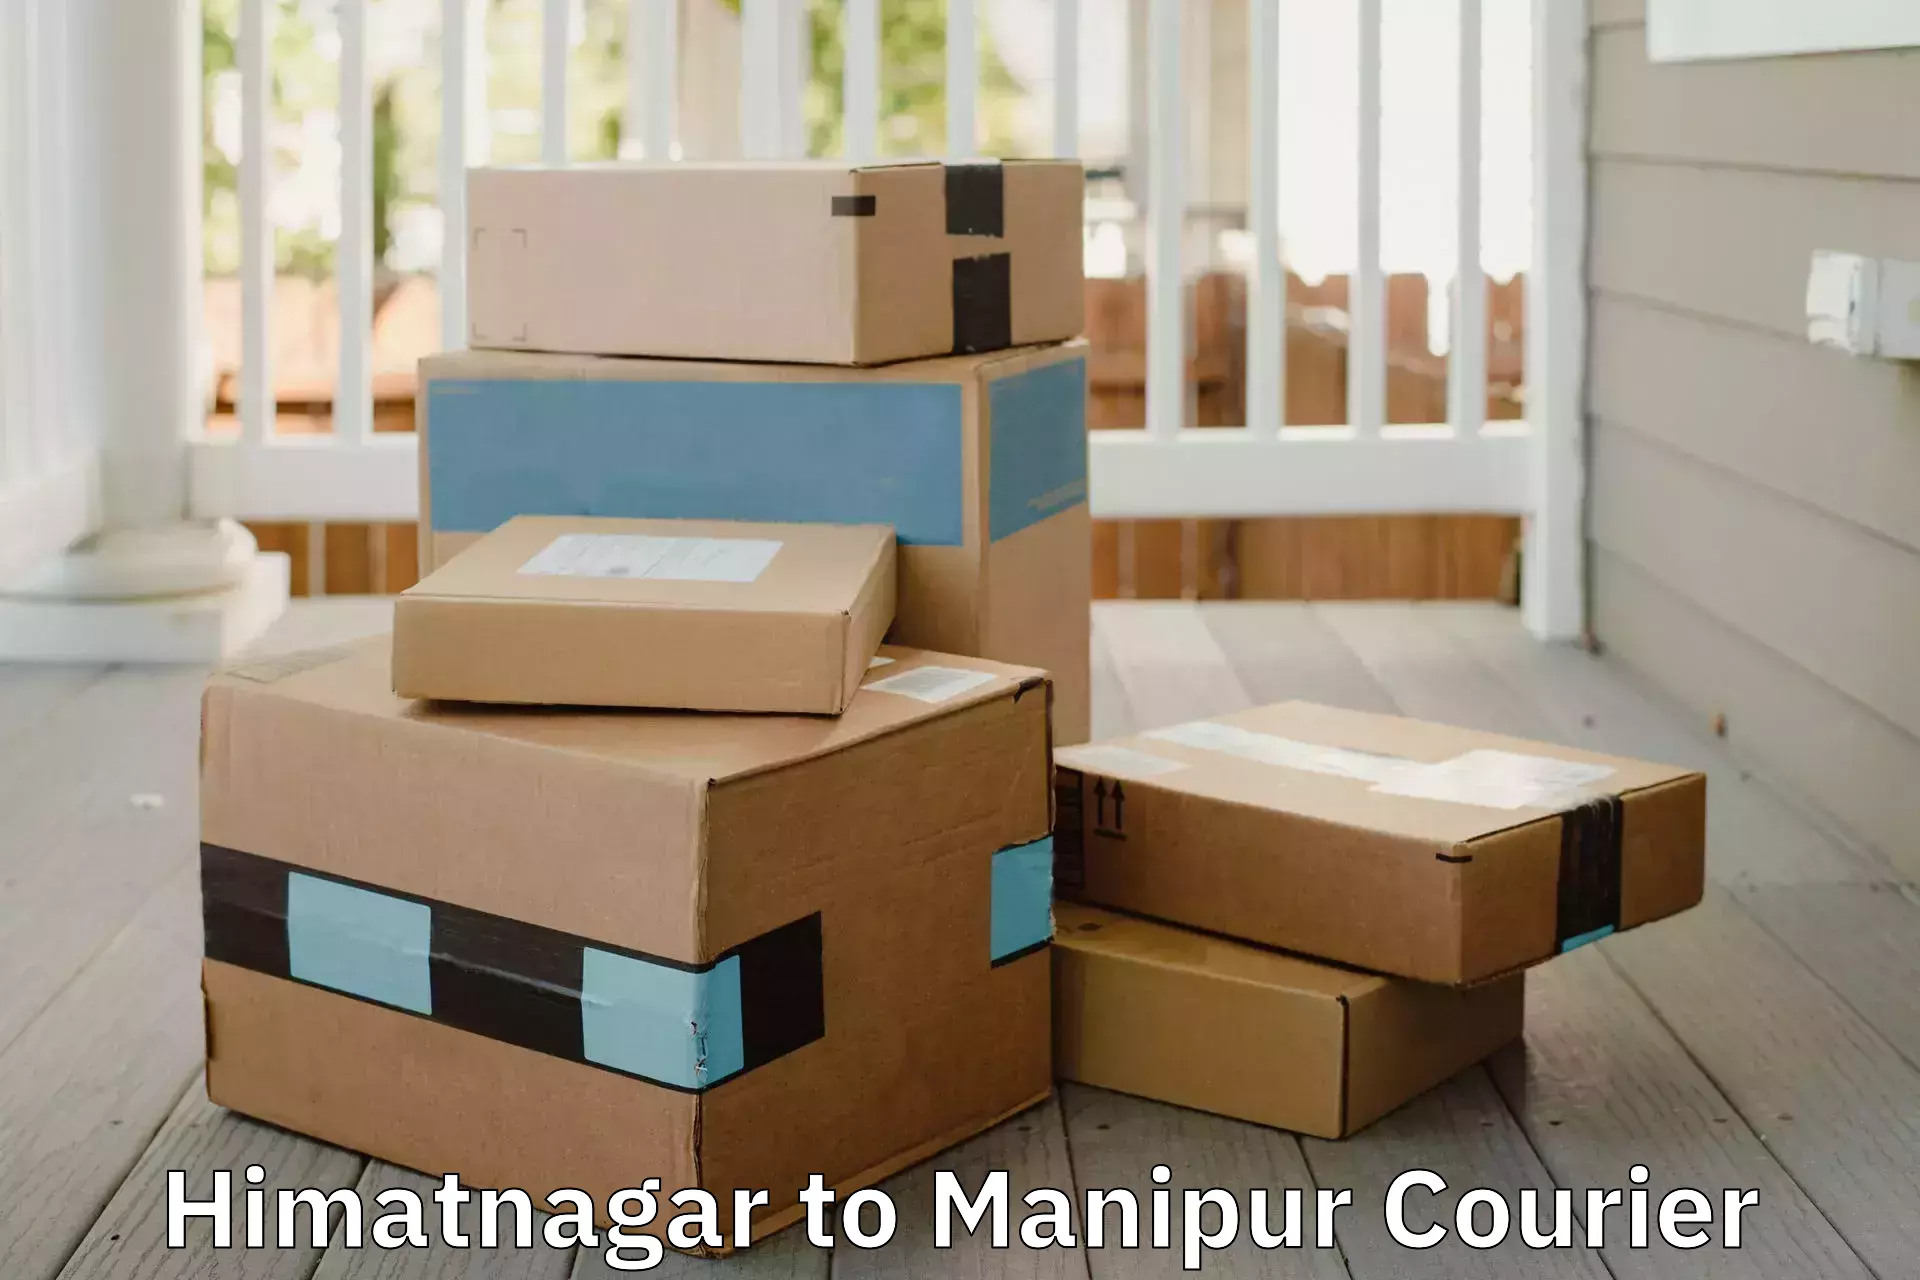 Trusted relocation experts Himatnagar to Manipur